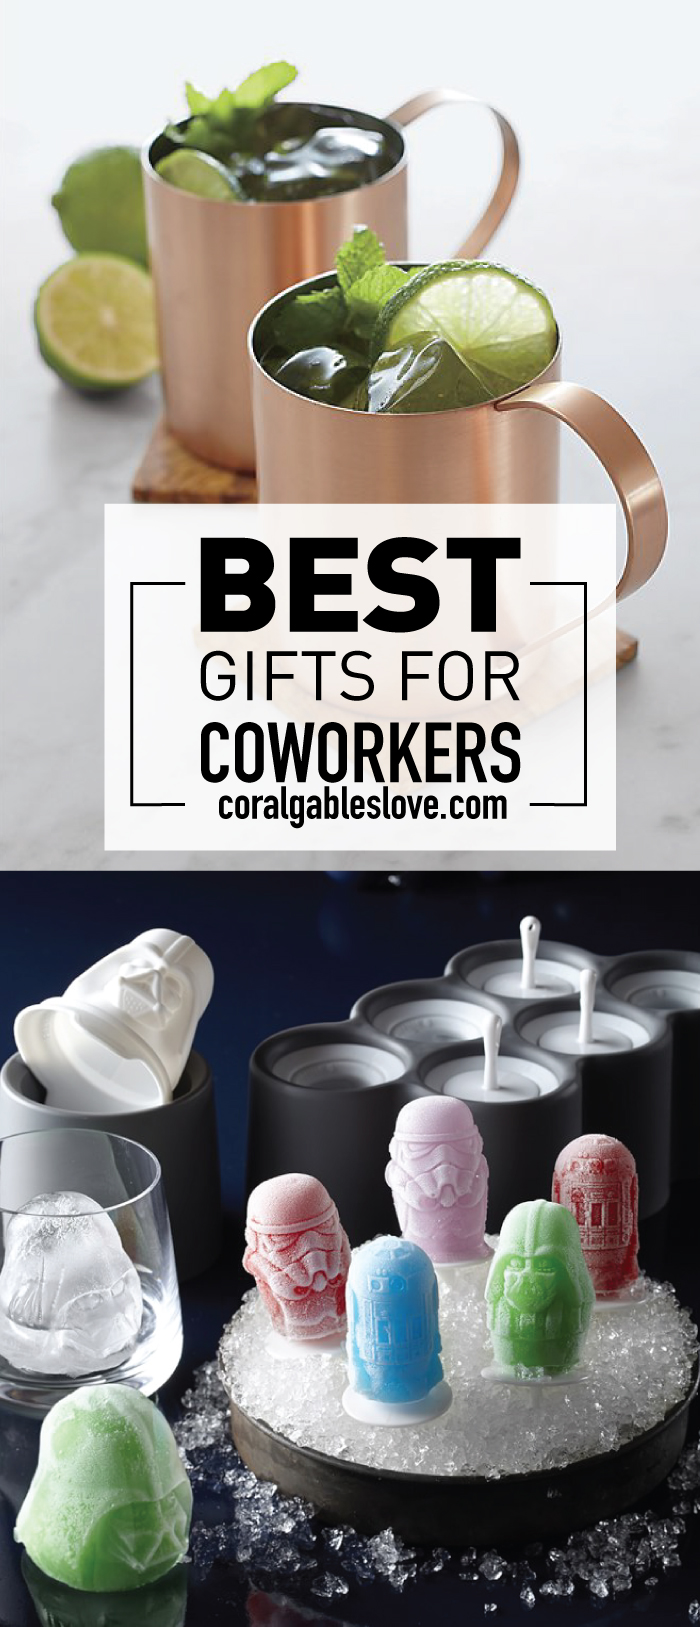 Top 20 Best Gifts For Coworkers You can Buy in Downtown Coral Gables, Florida. Click to read more or pin and save for later! Miami Shopping